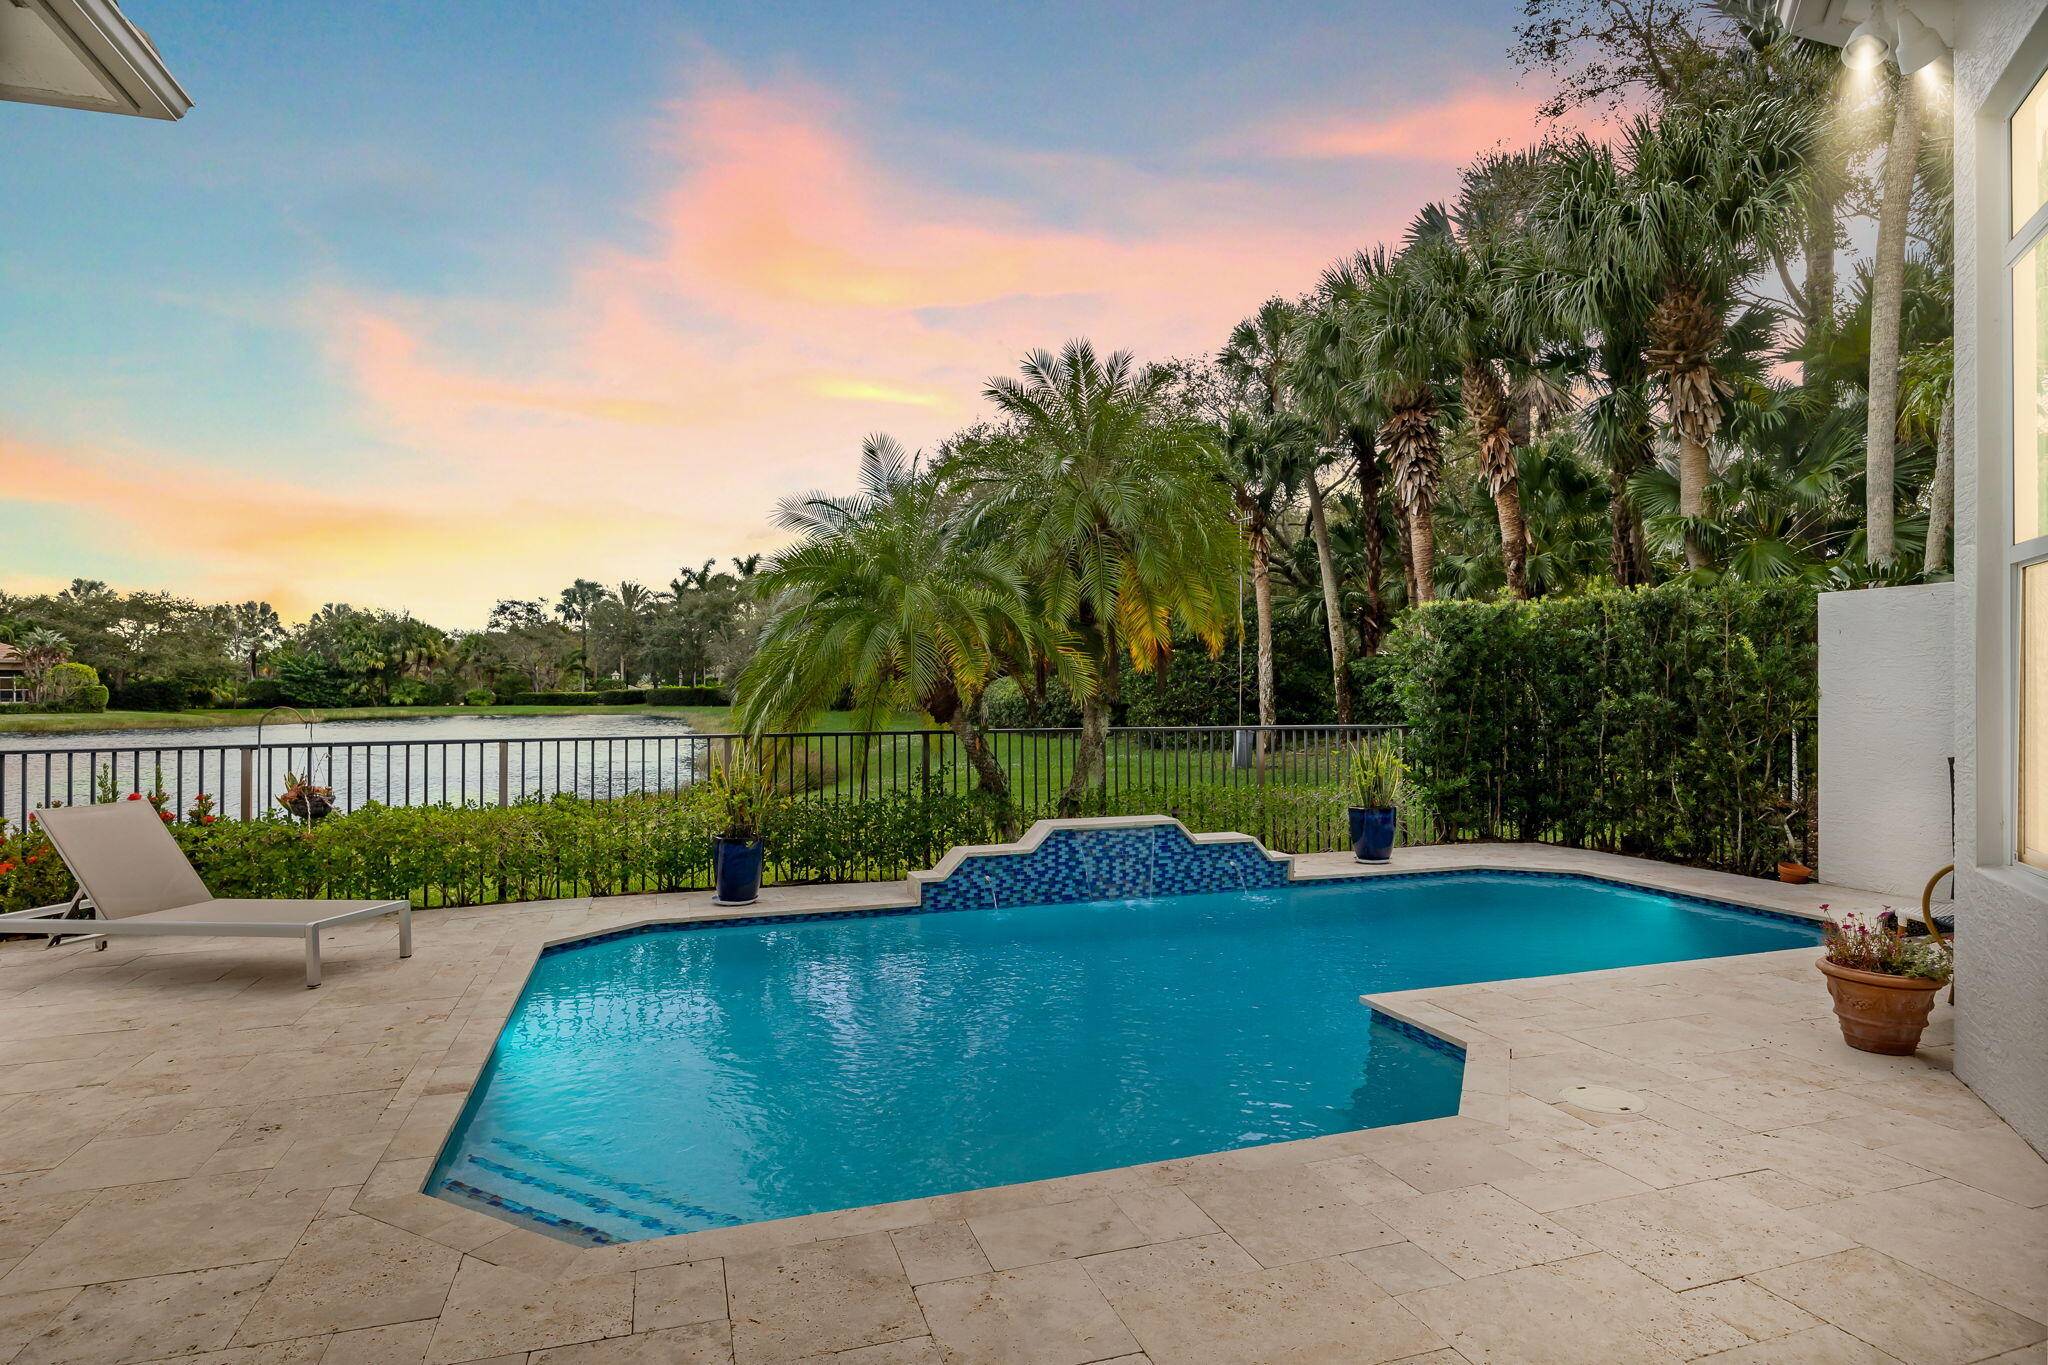 102 Dalena Way boasts the coveted Oviedo floor plan within the prestigious Mirasol Country Club Community.